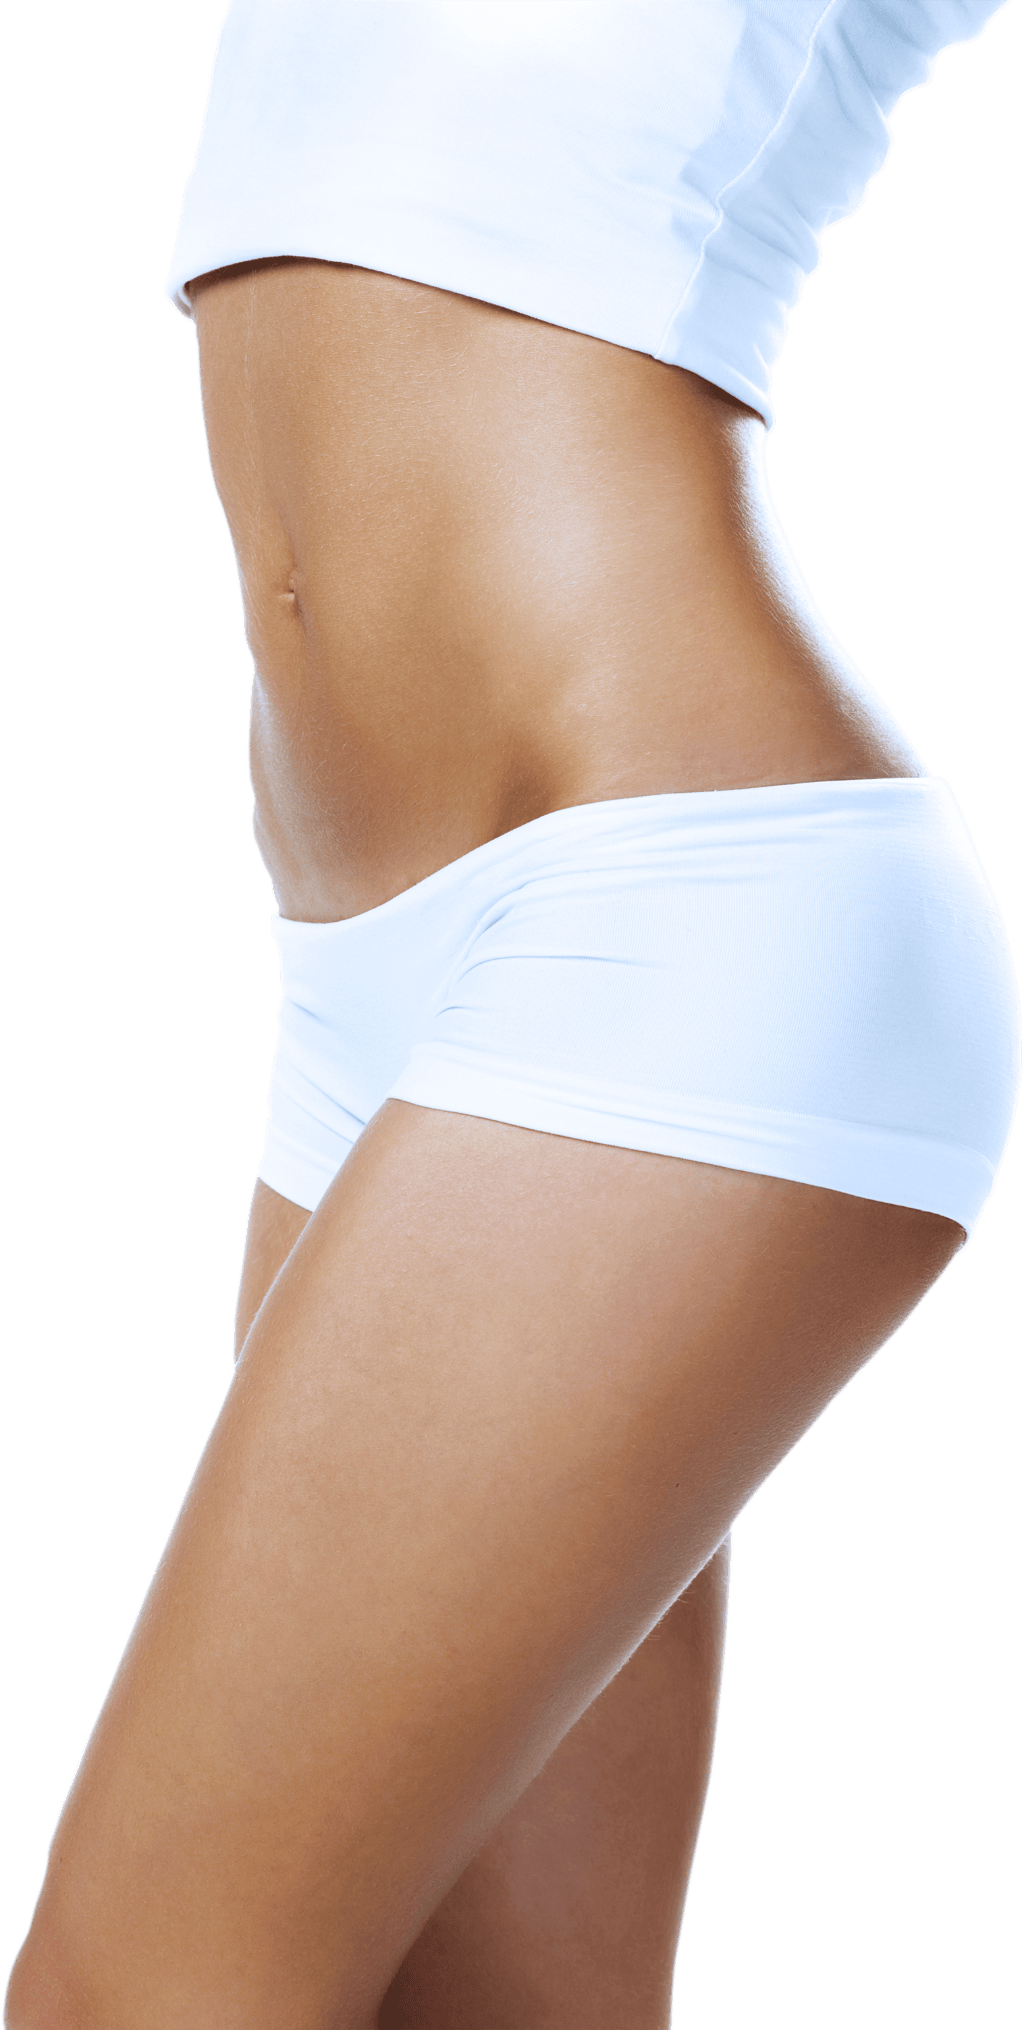 Flat stomach with CoolSculpting Fat Freezing in Oakland, CA